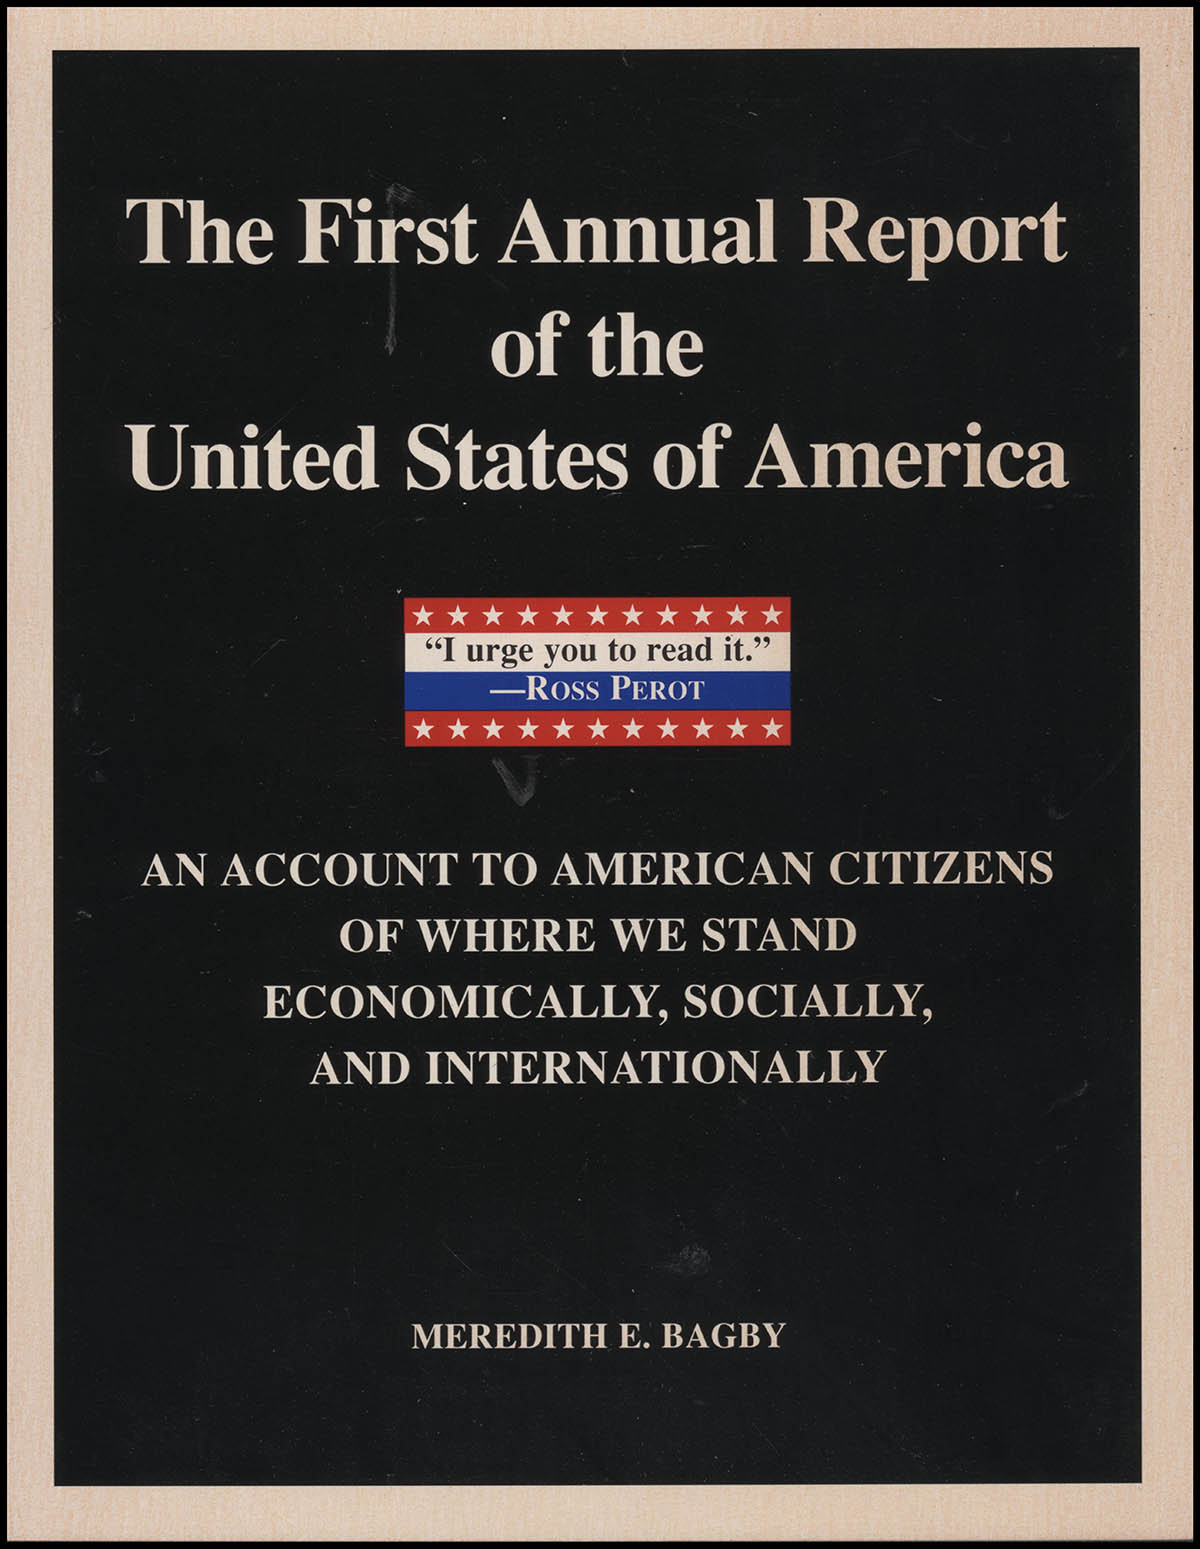 Bagby, Meredith E. - The First Annual Report of the United States of America